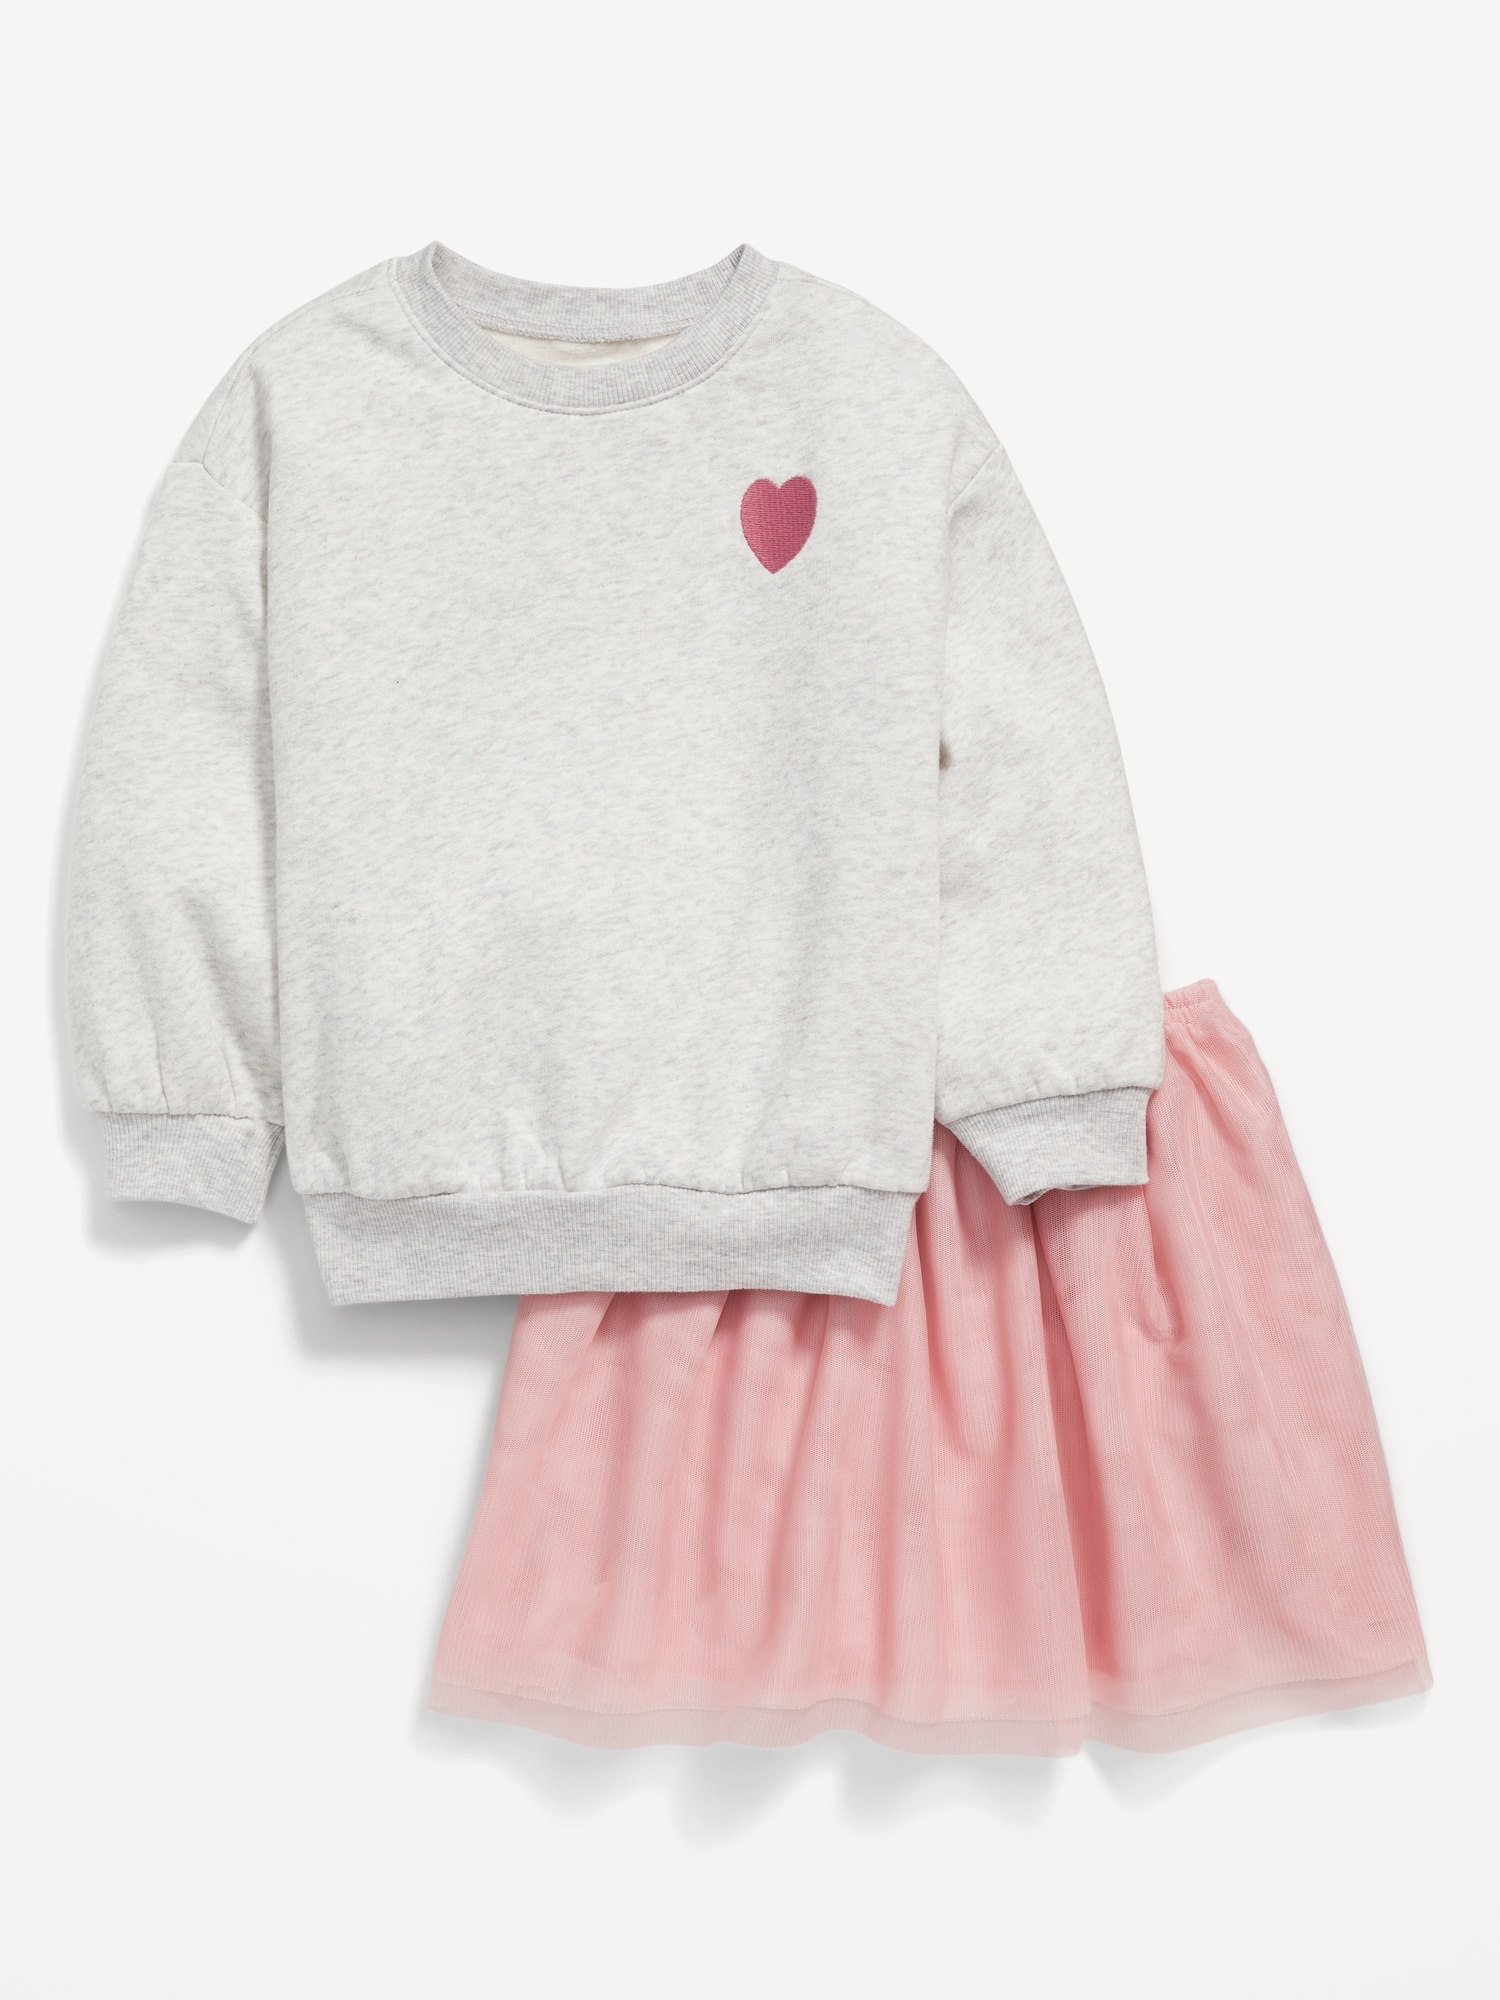 French-Terry Sweatshirt and Tulle Tutu Skirt for Toddler Girls | Old Navy